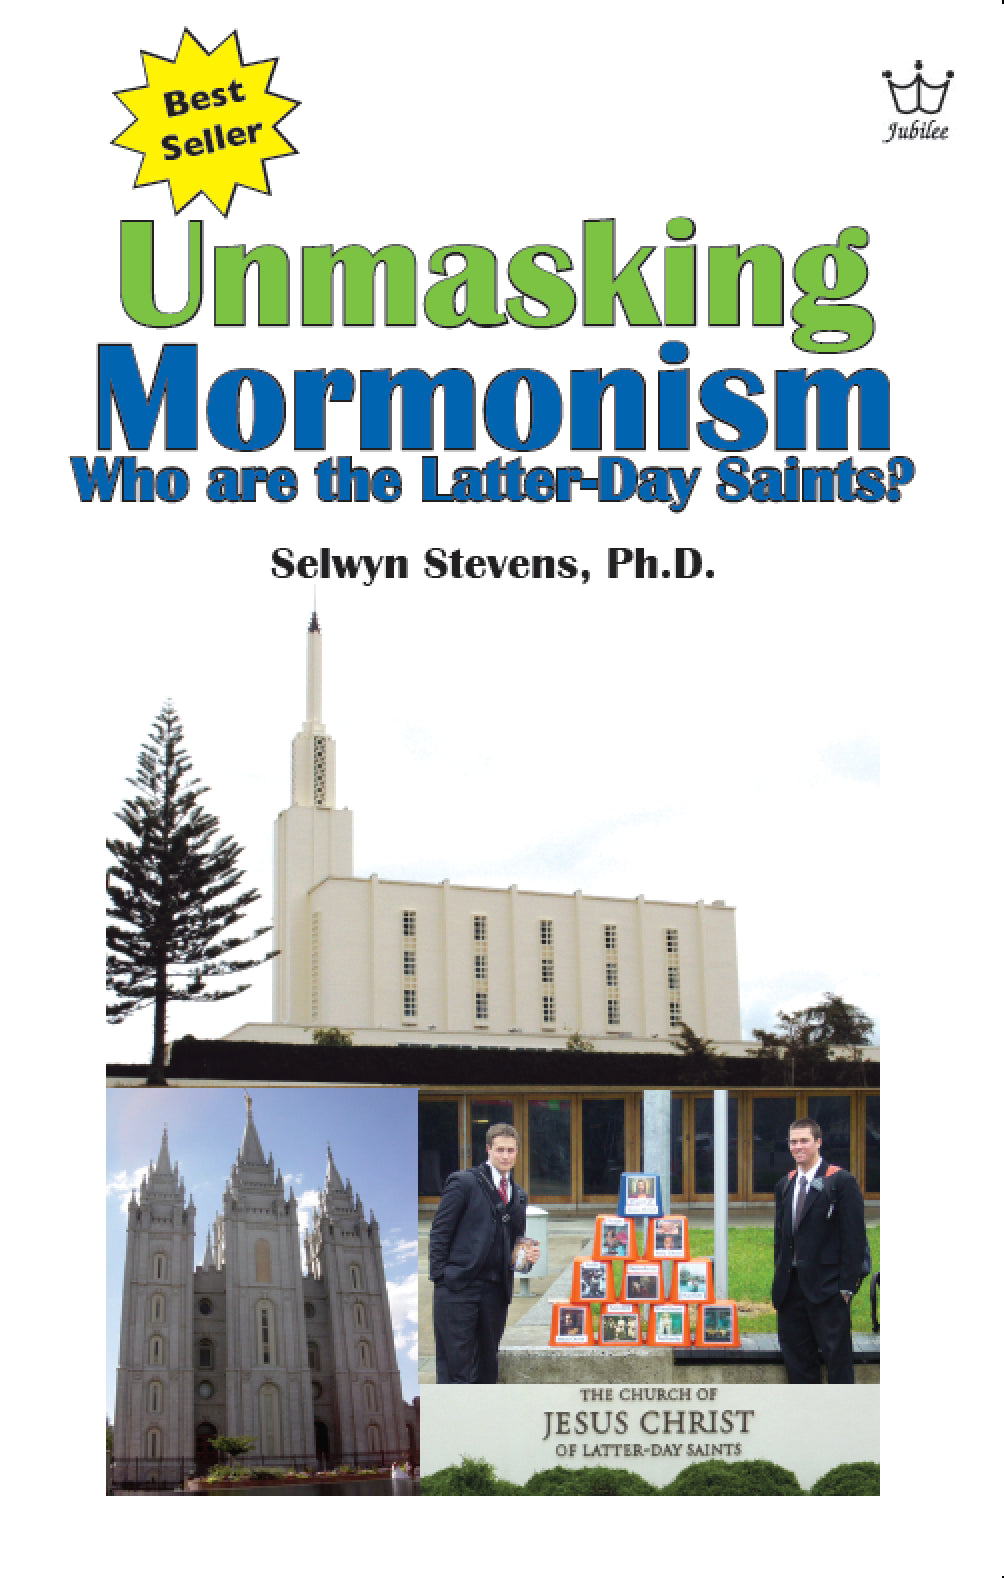 Unmasking Mormonism - Who are the Latter-day Saints? # BUMS